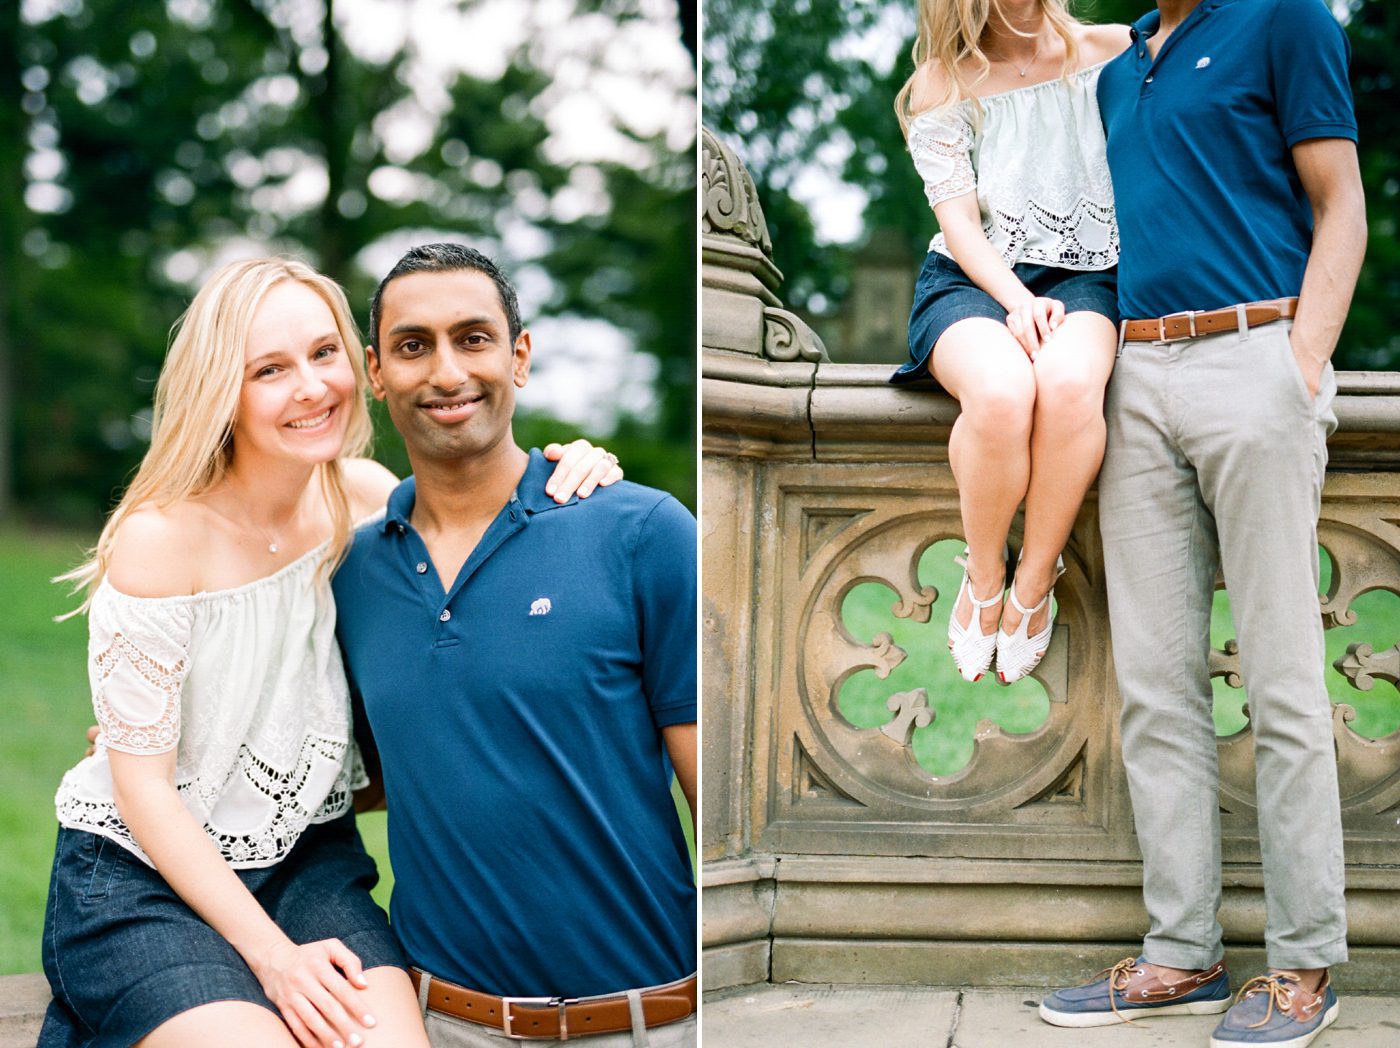 Central Park engagement pics on film by Catherine Ann Photography